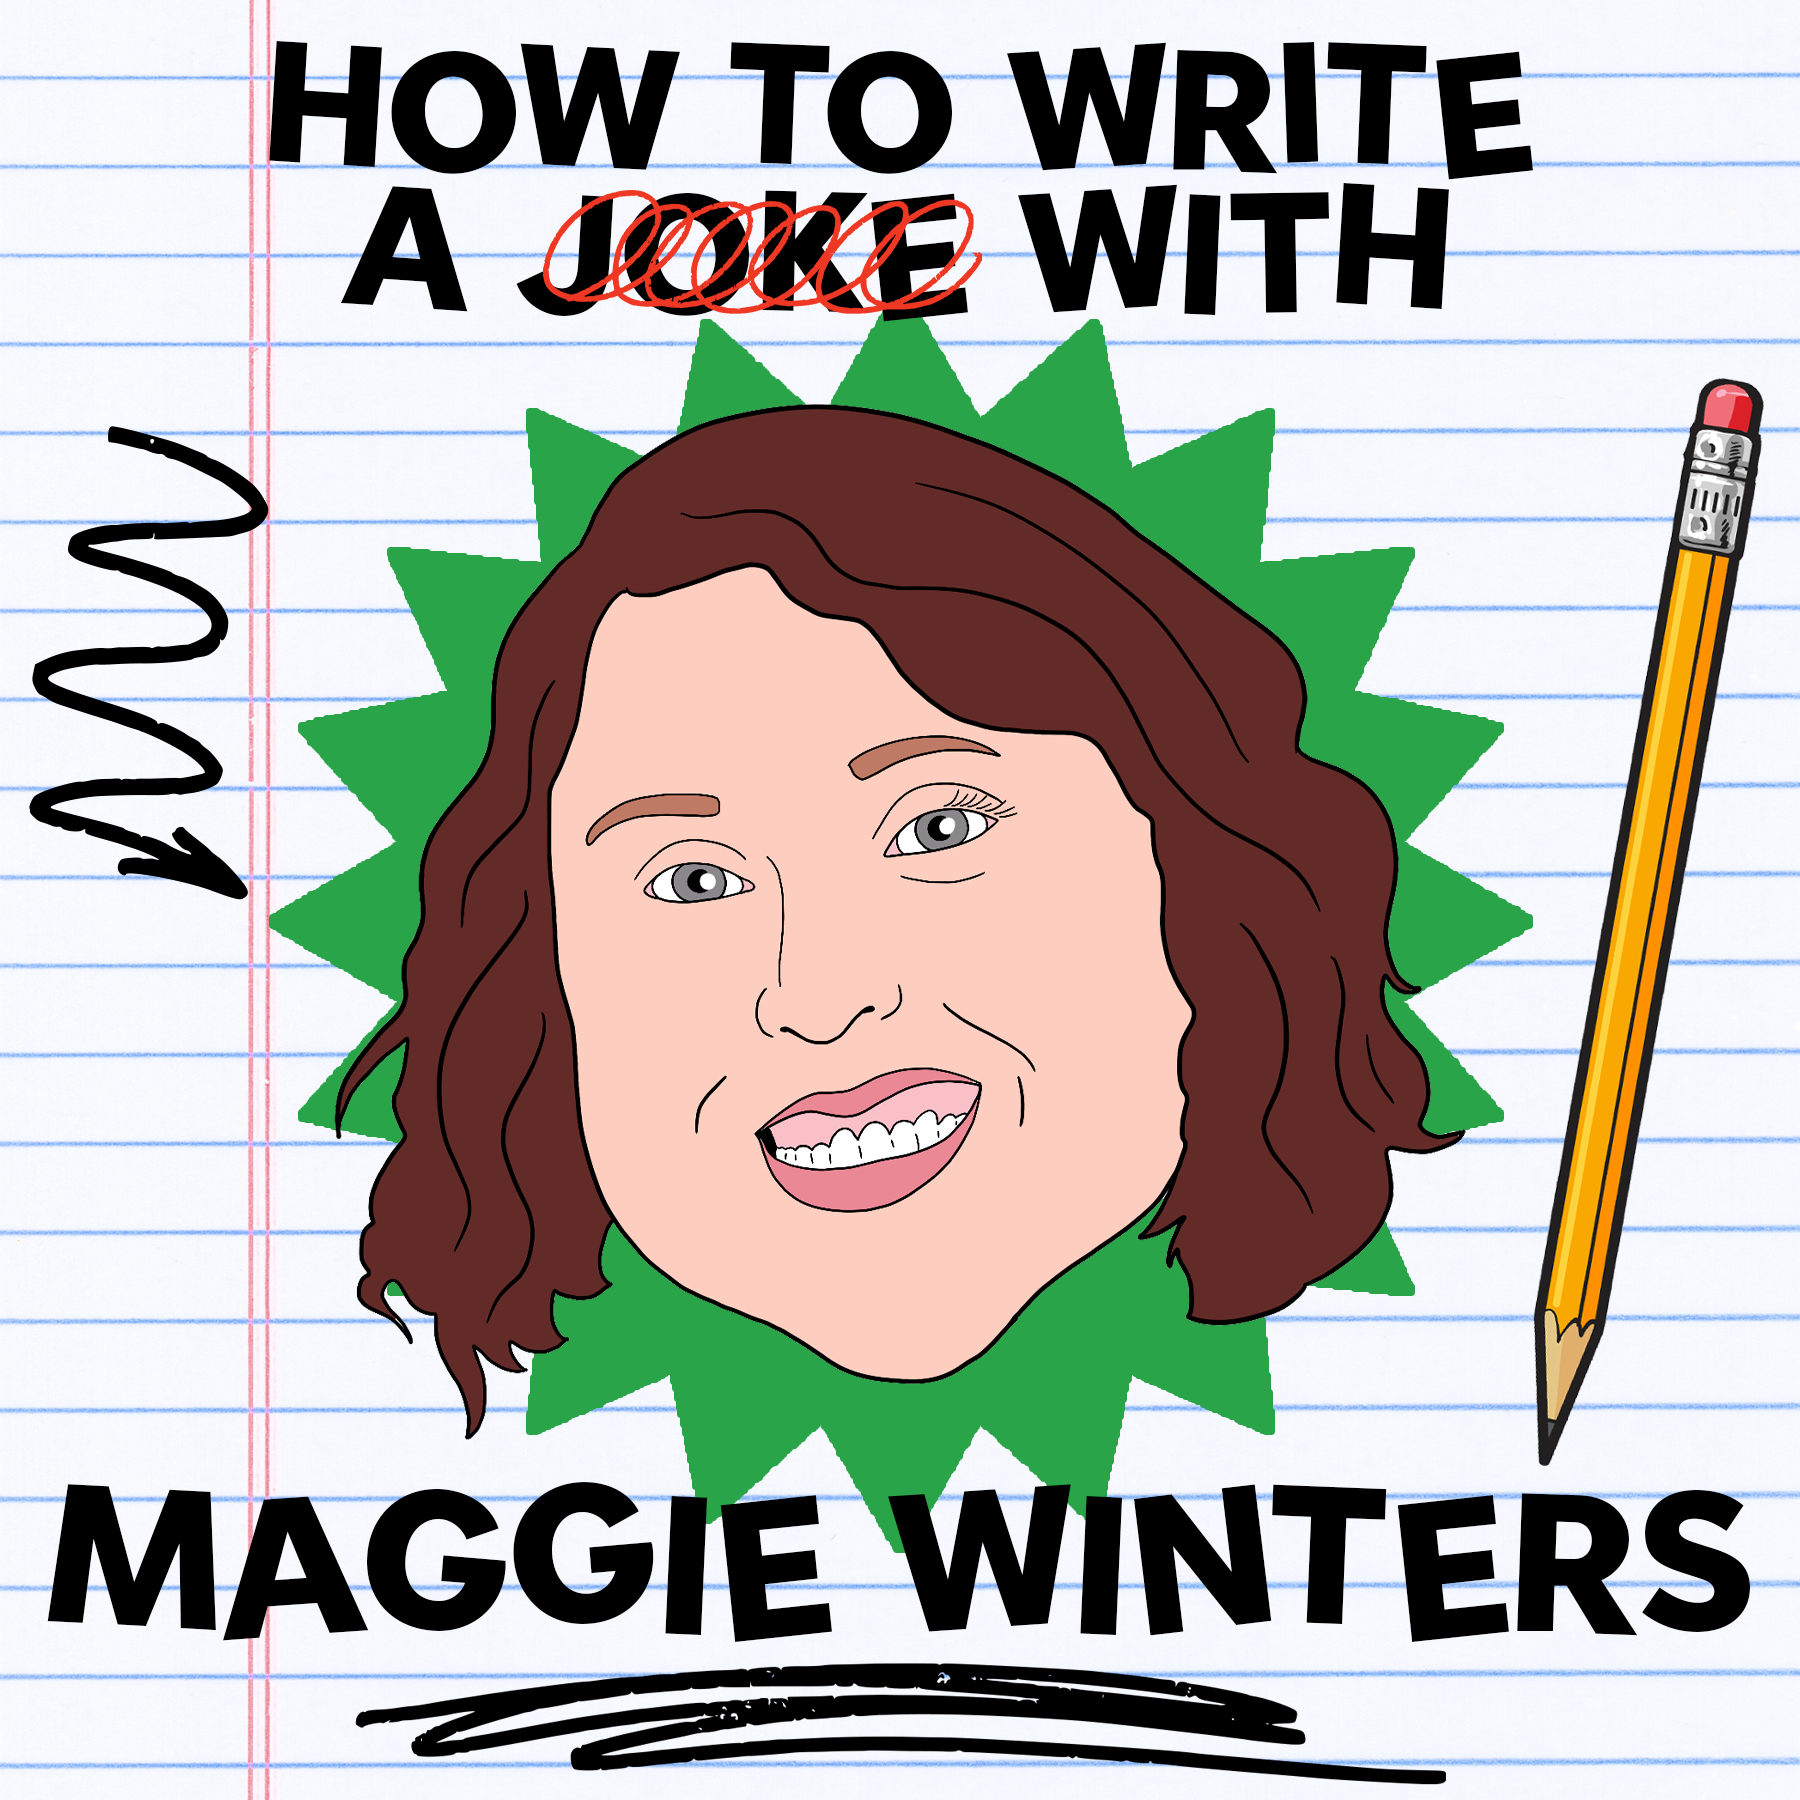 How to Write a Joke with Maggie Winters!